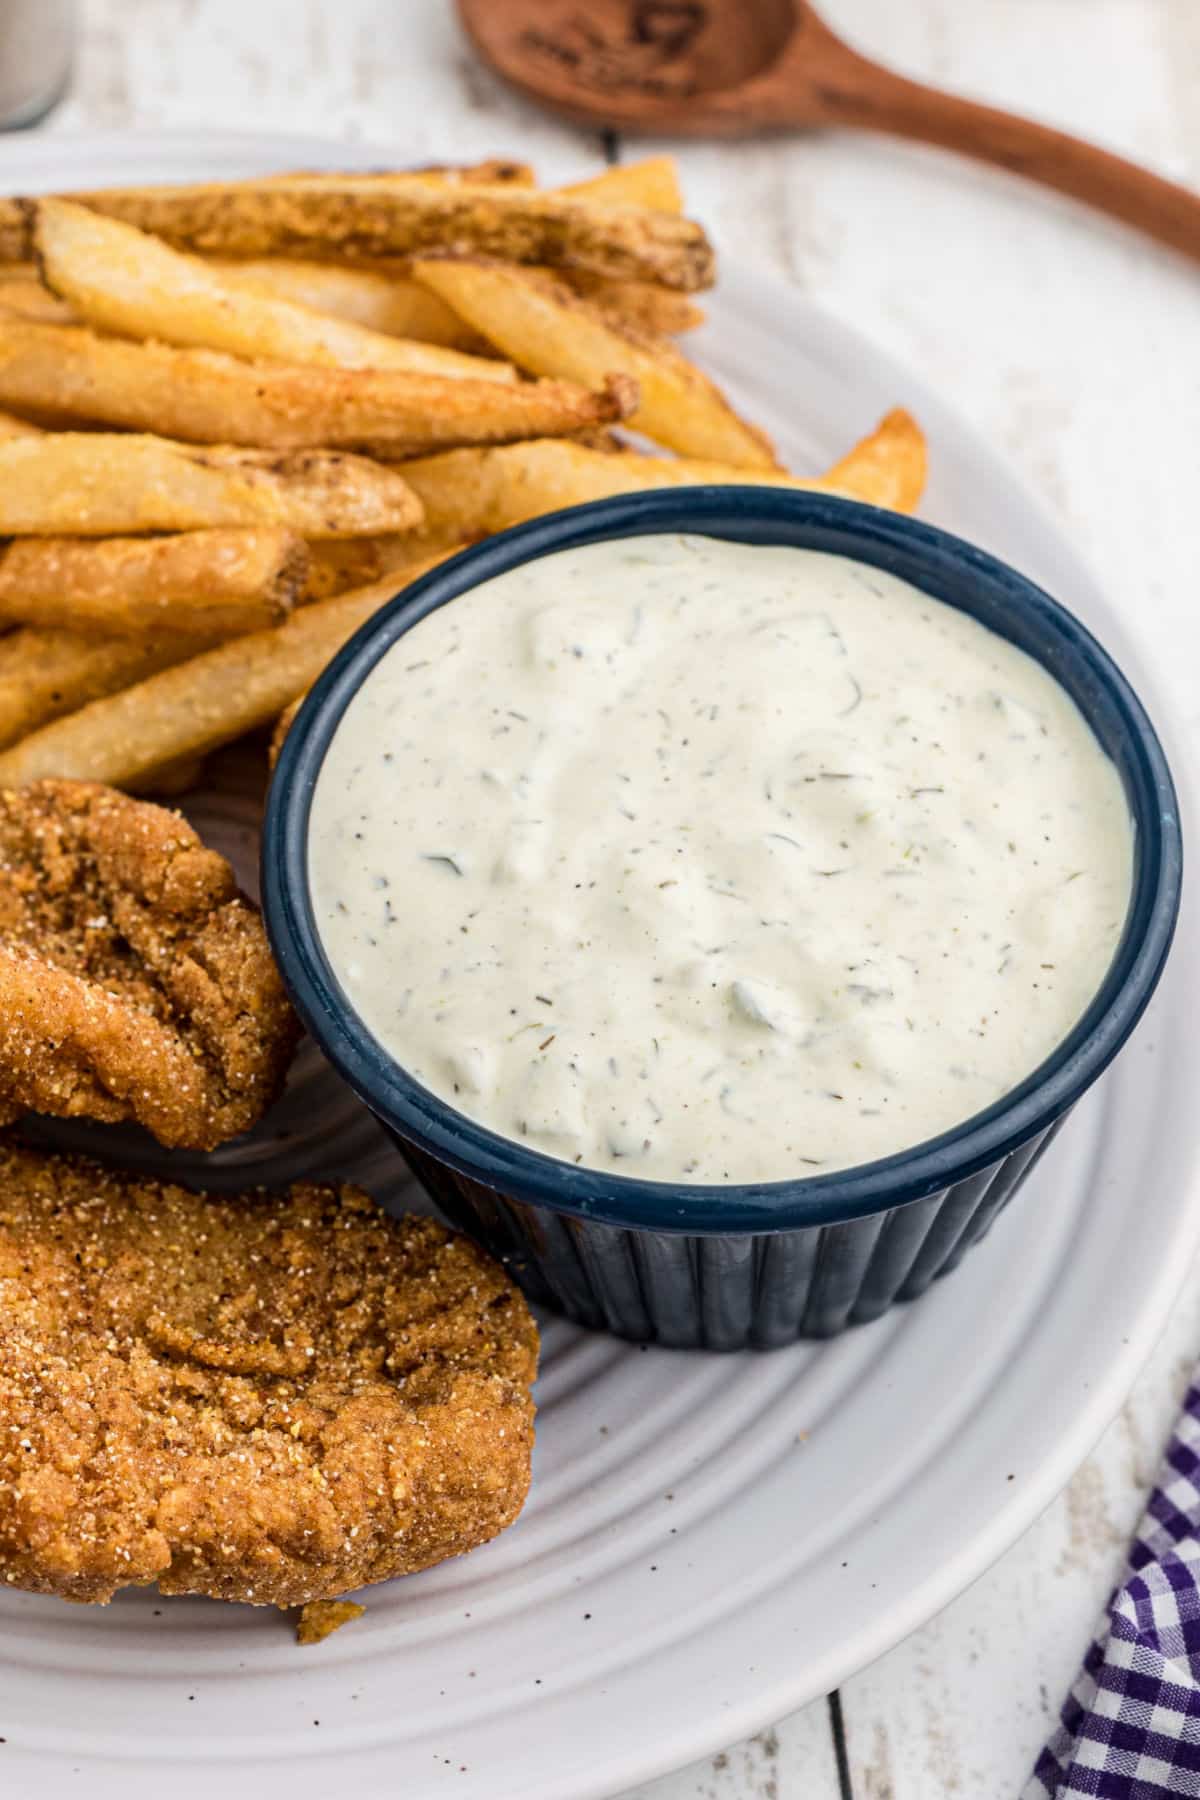 an overhead view of a dish of tartar sauce with some fish on the side.